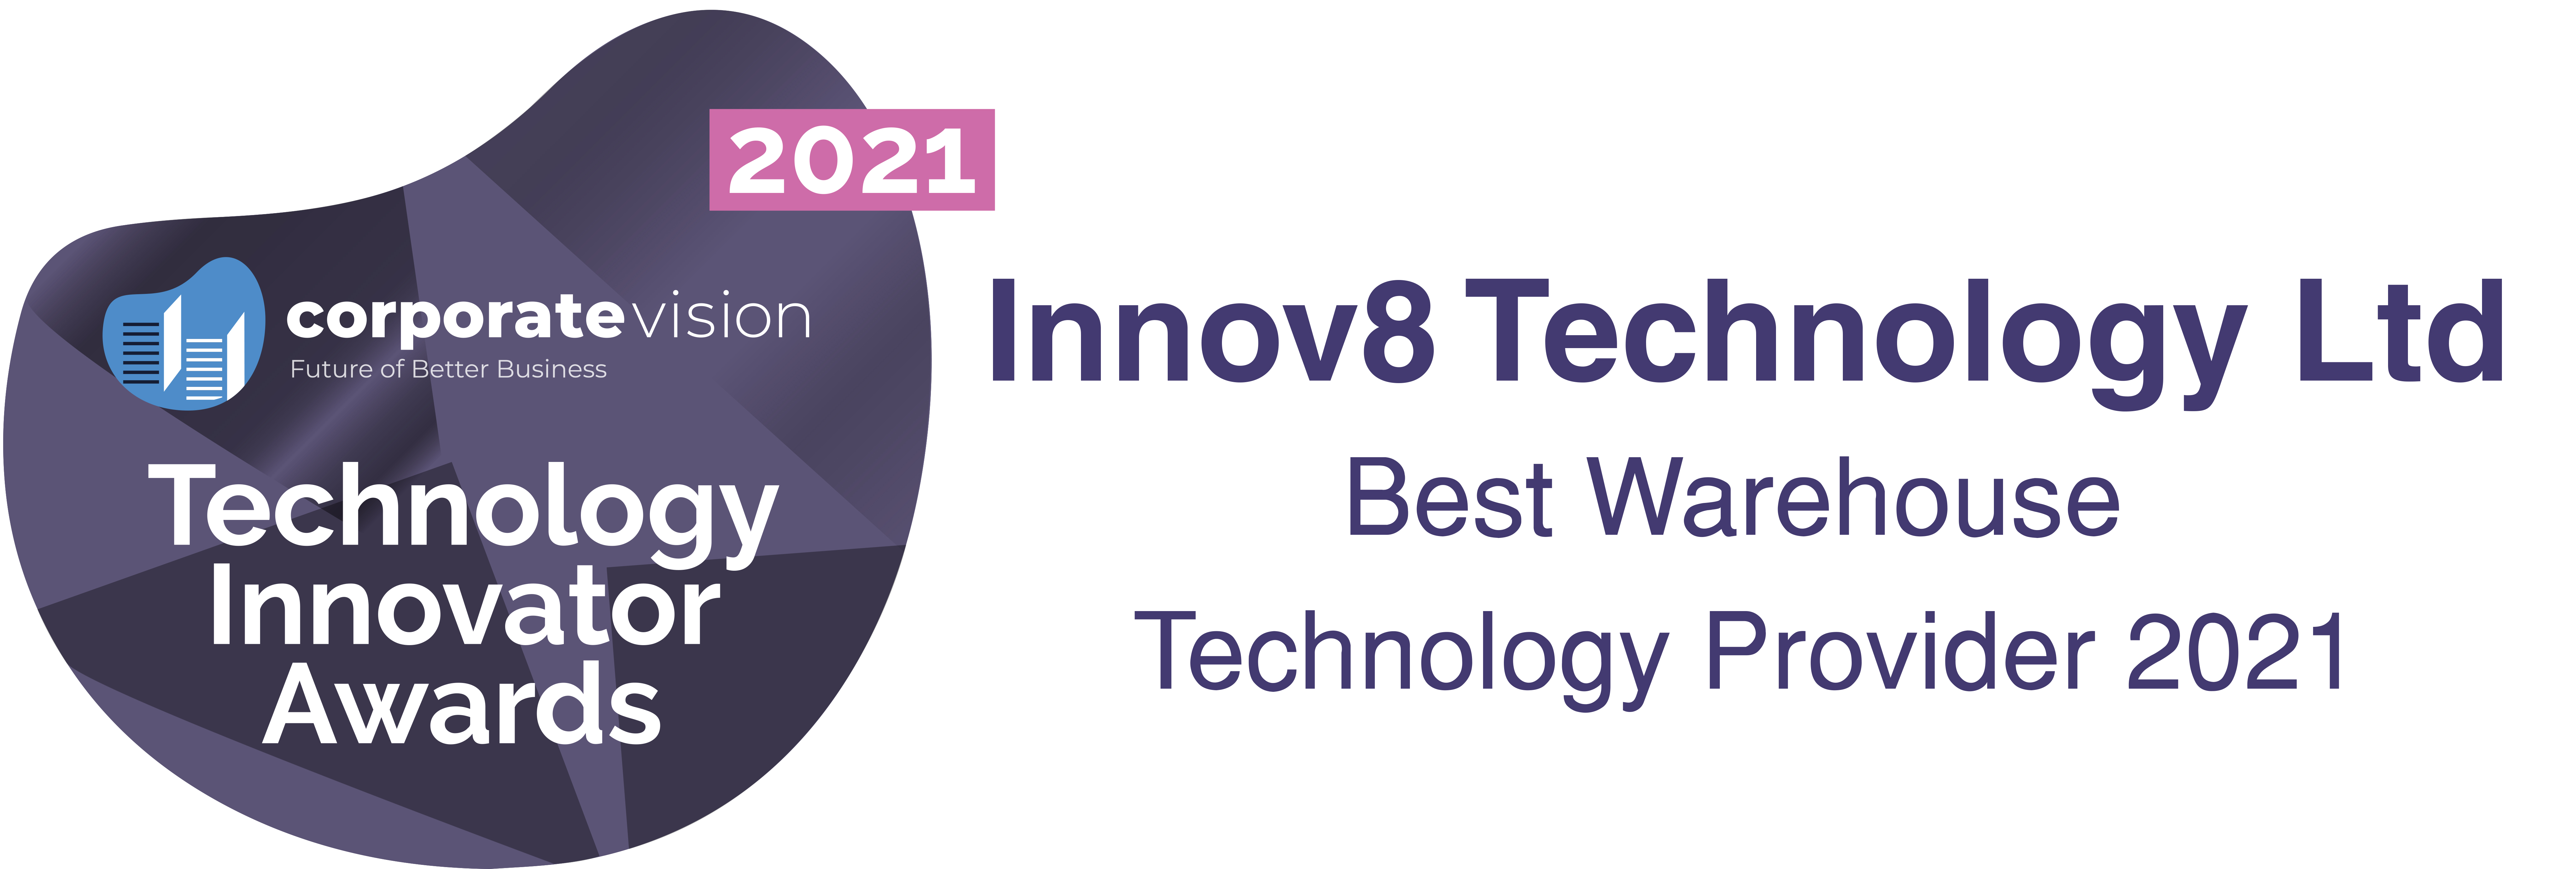 innware - Excellence & Innovation Awards 2021